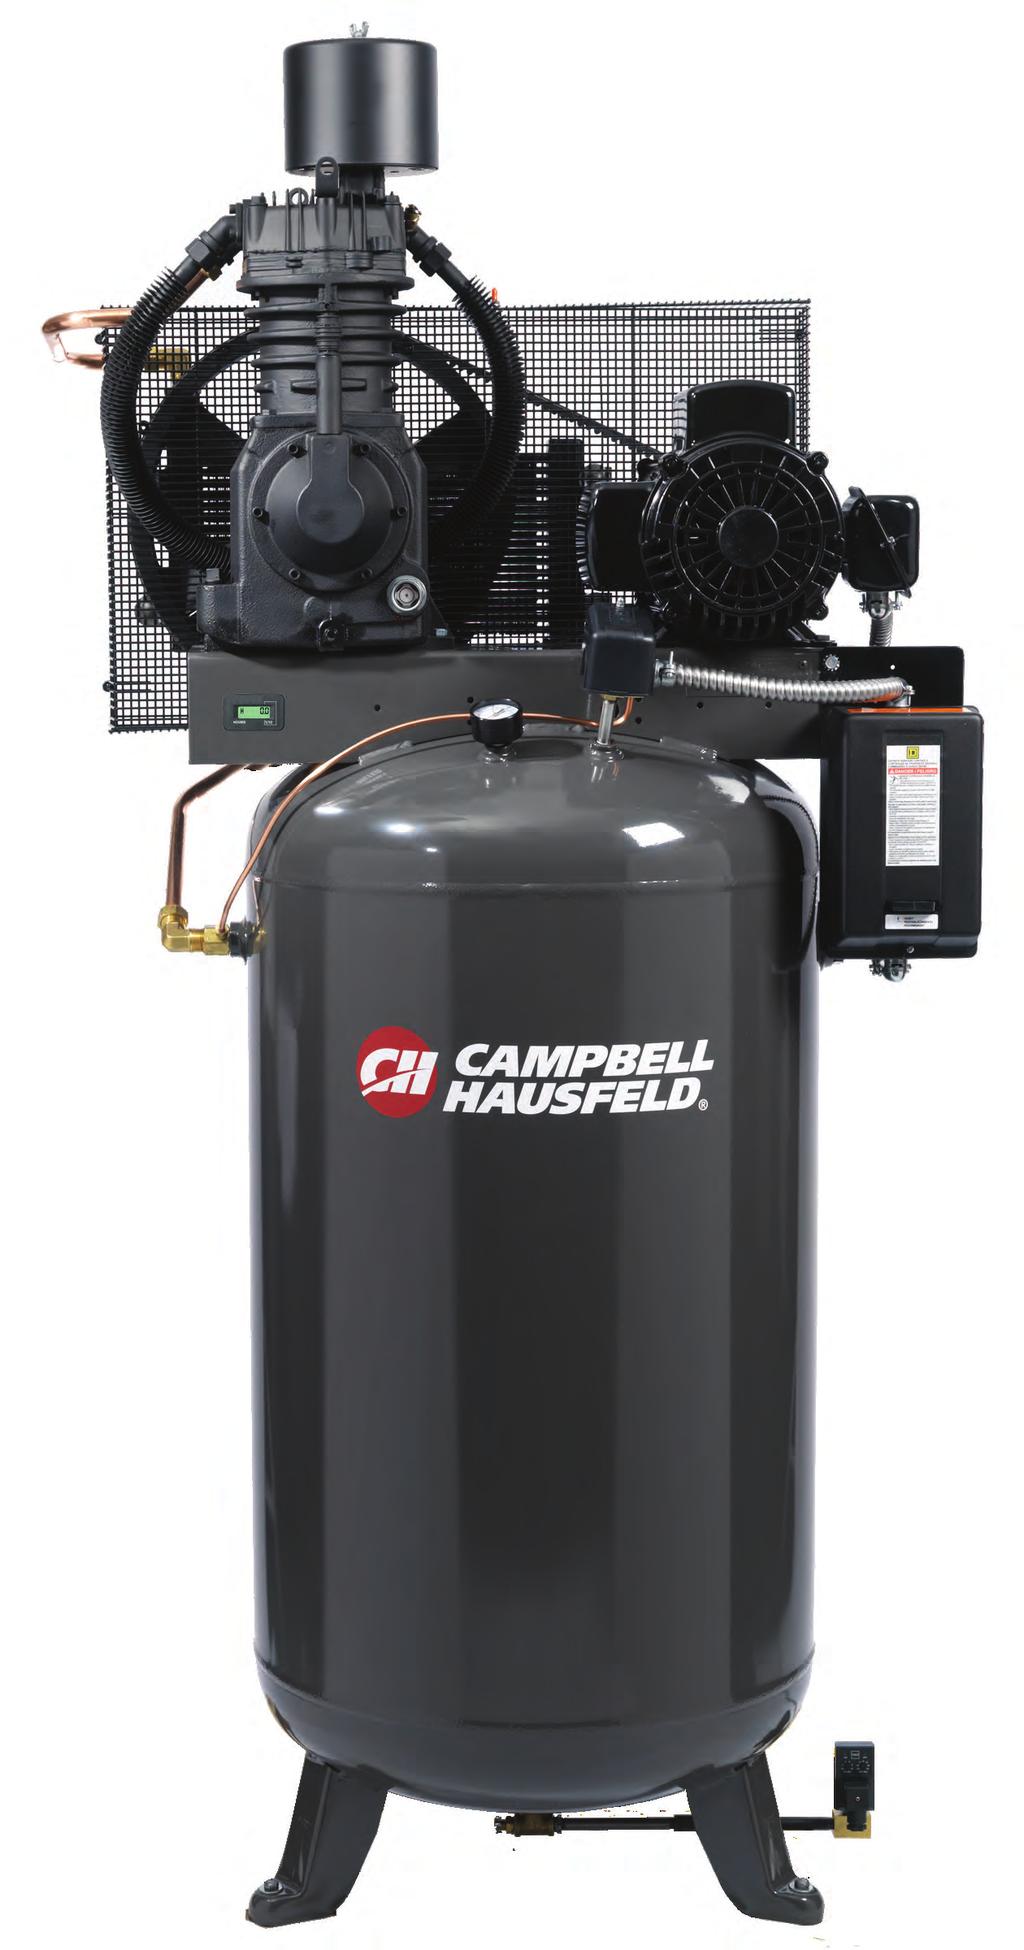 the compressor. They are ideally suited for tire and lube facilities, collision repair shops, or manufacturing facilities.